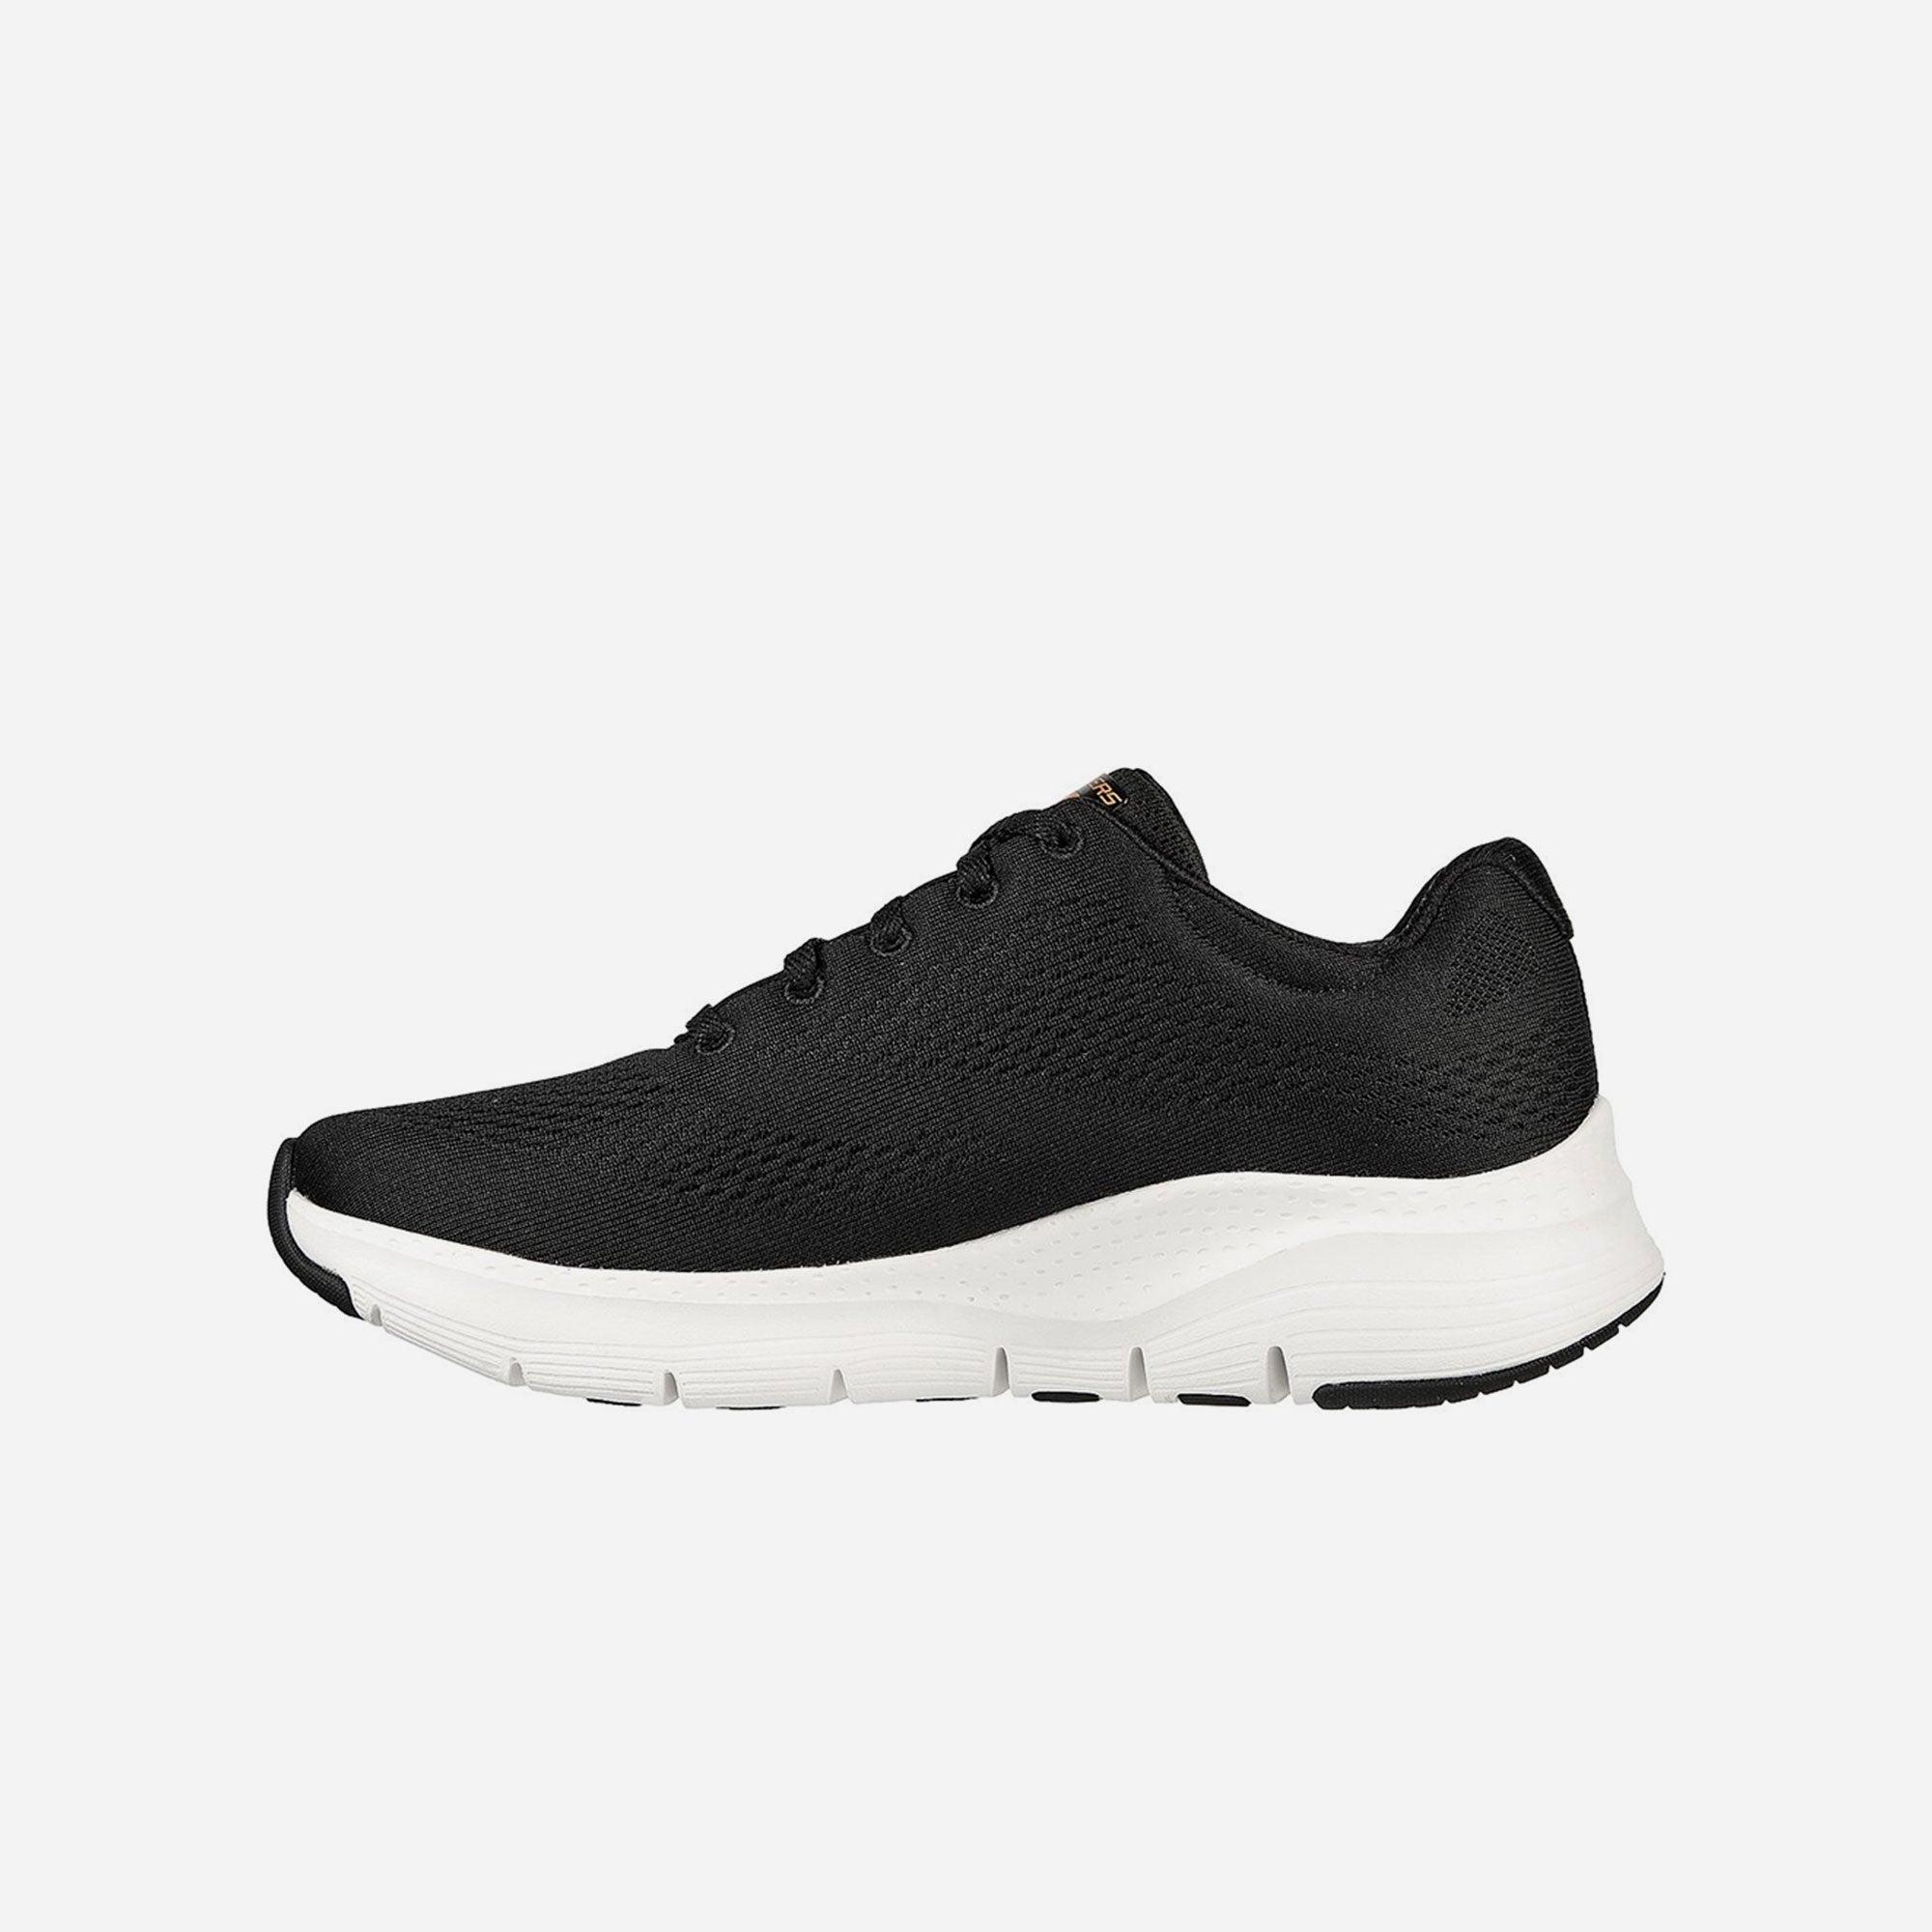 Giày sneakers nữ Skechers Arch Fit - 149057-BKRG